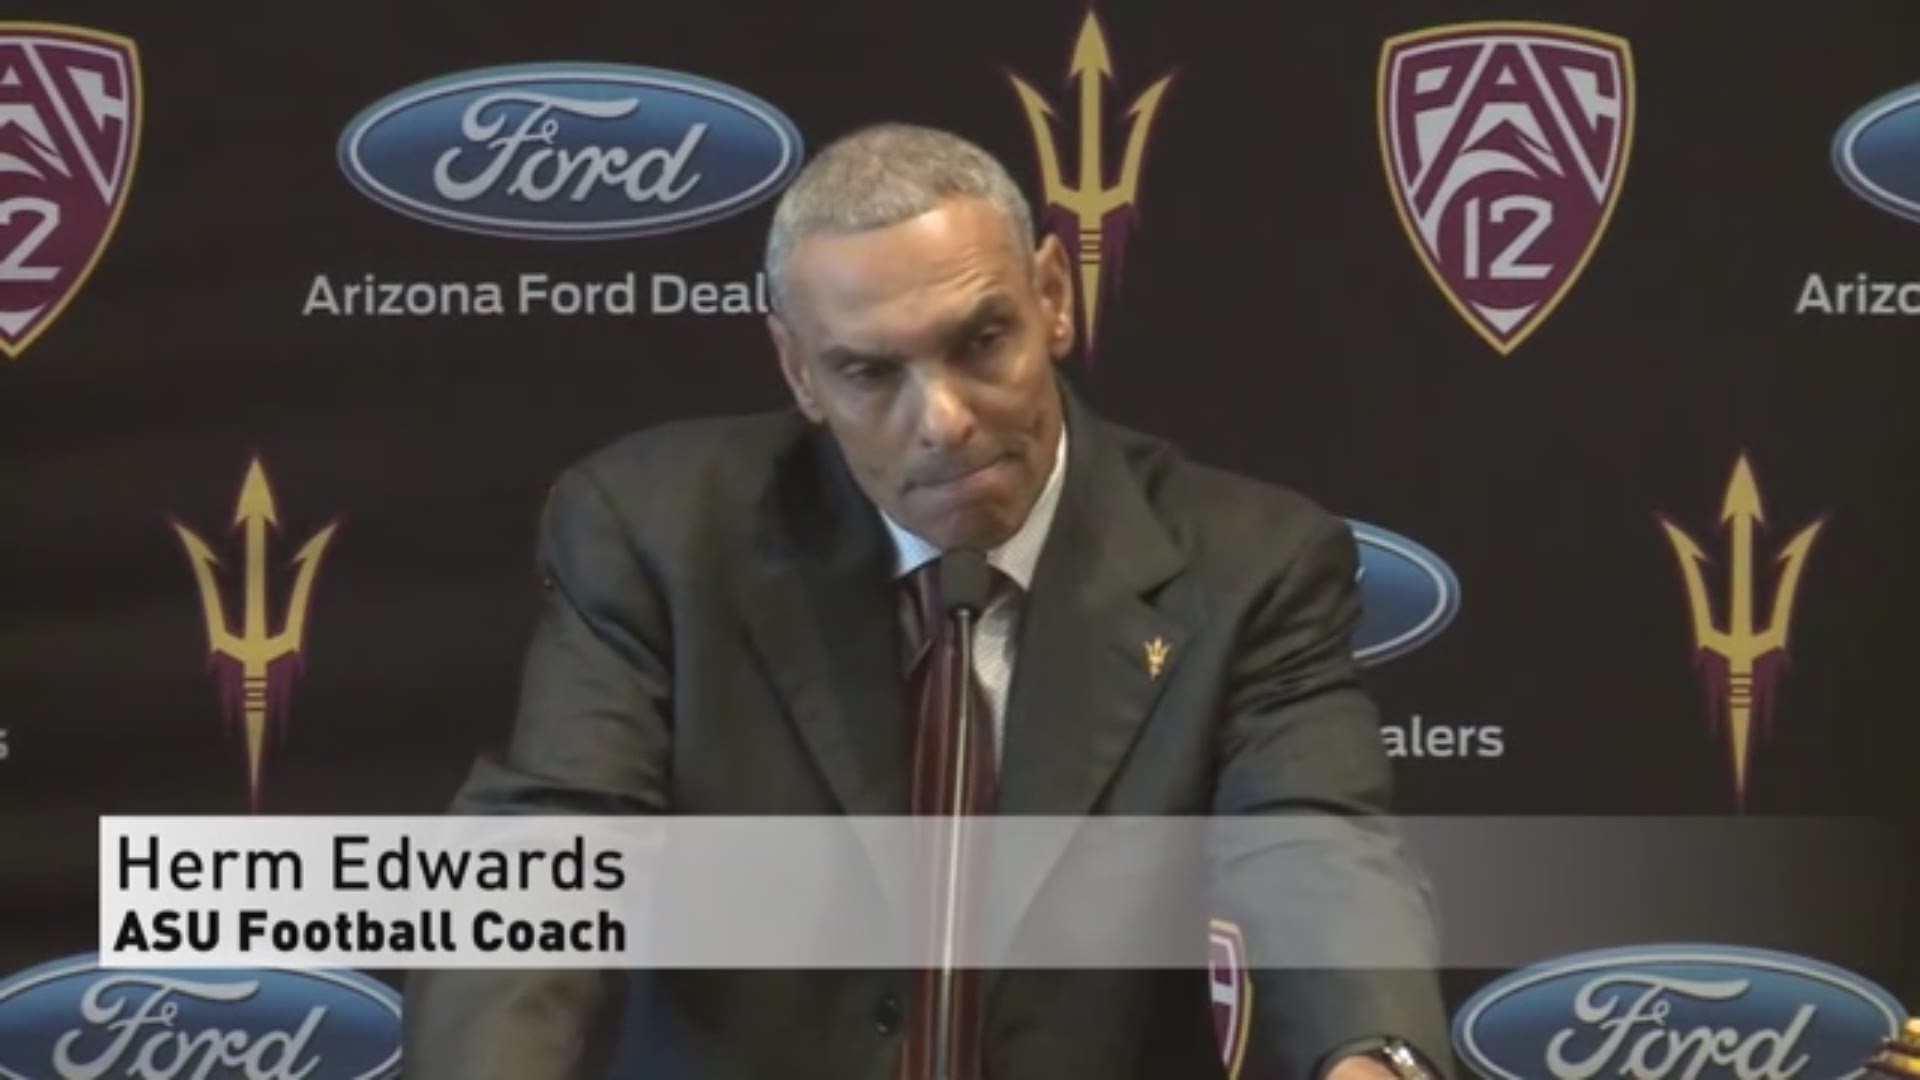 Edwards responded bizarrely to a reporter's identification during his introductory press conference as the Arizona State head football coach.